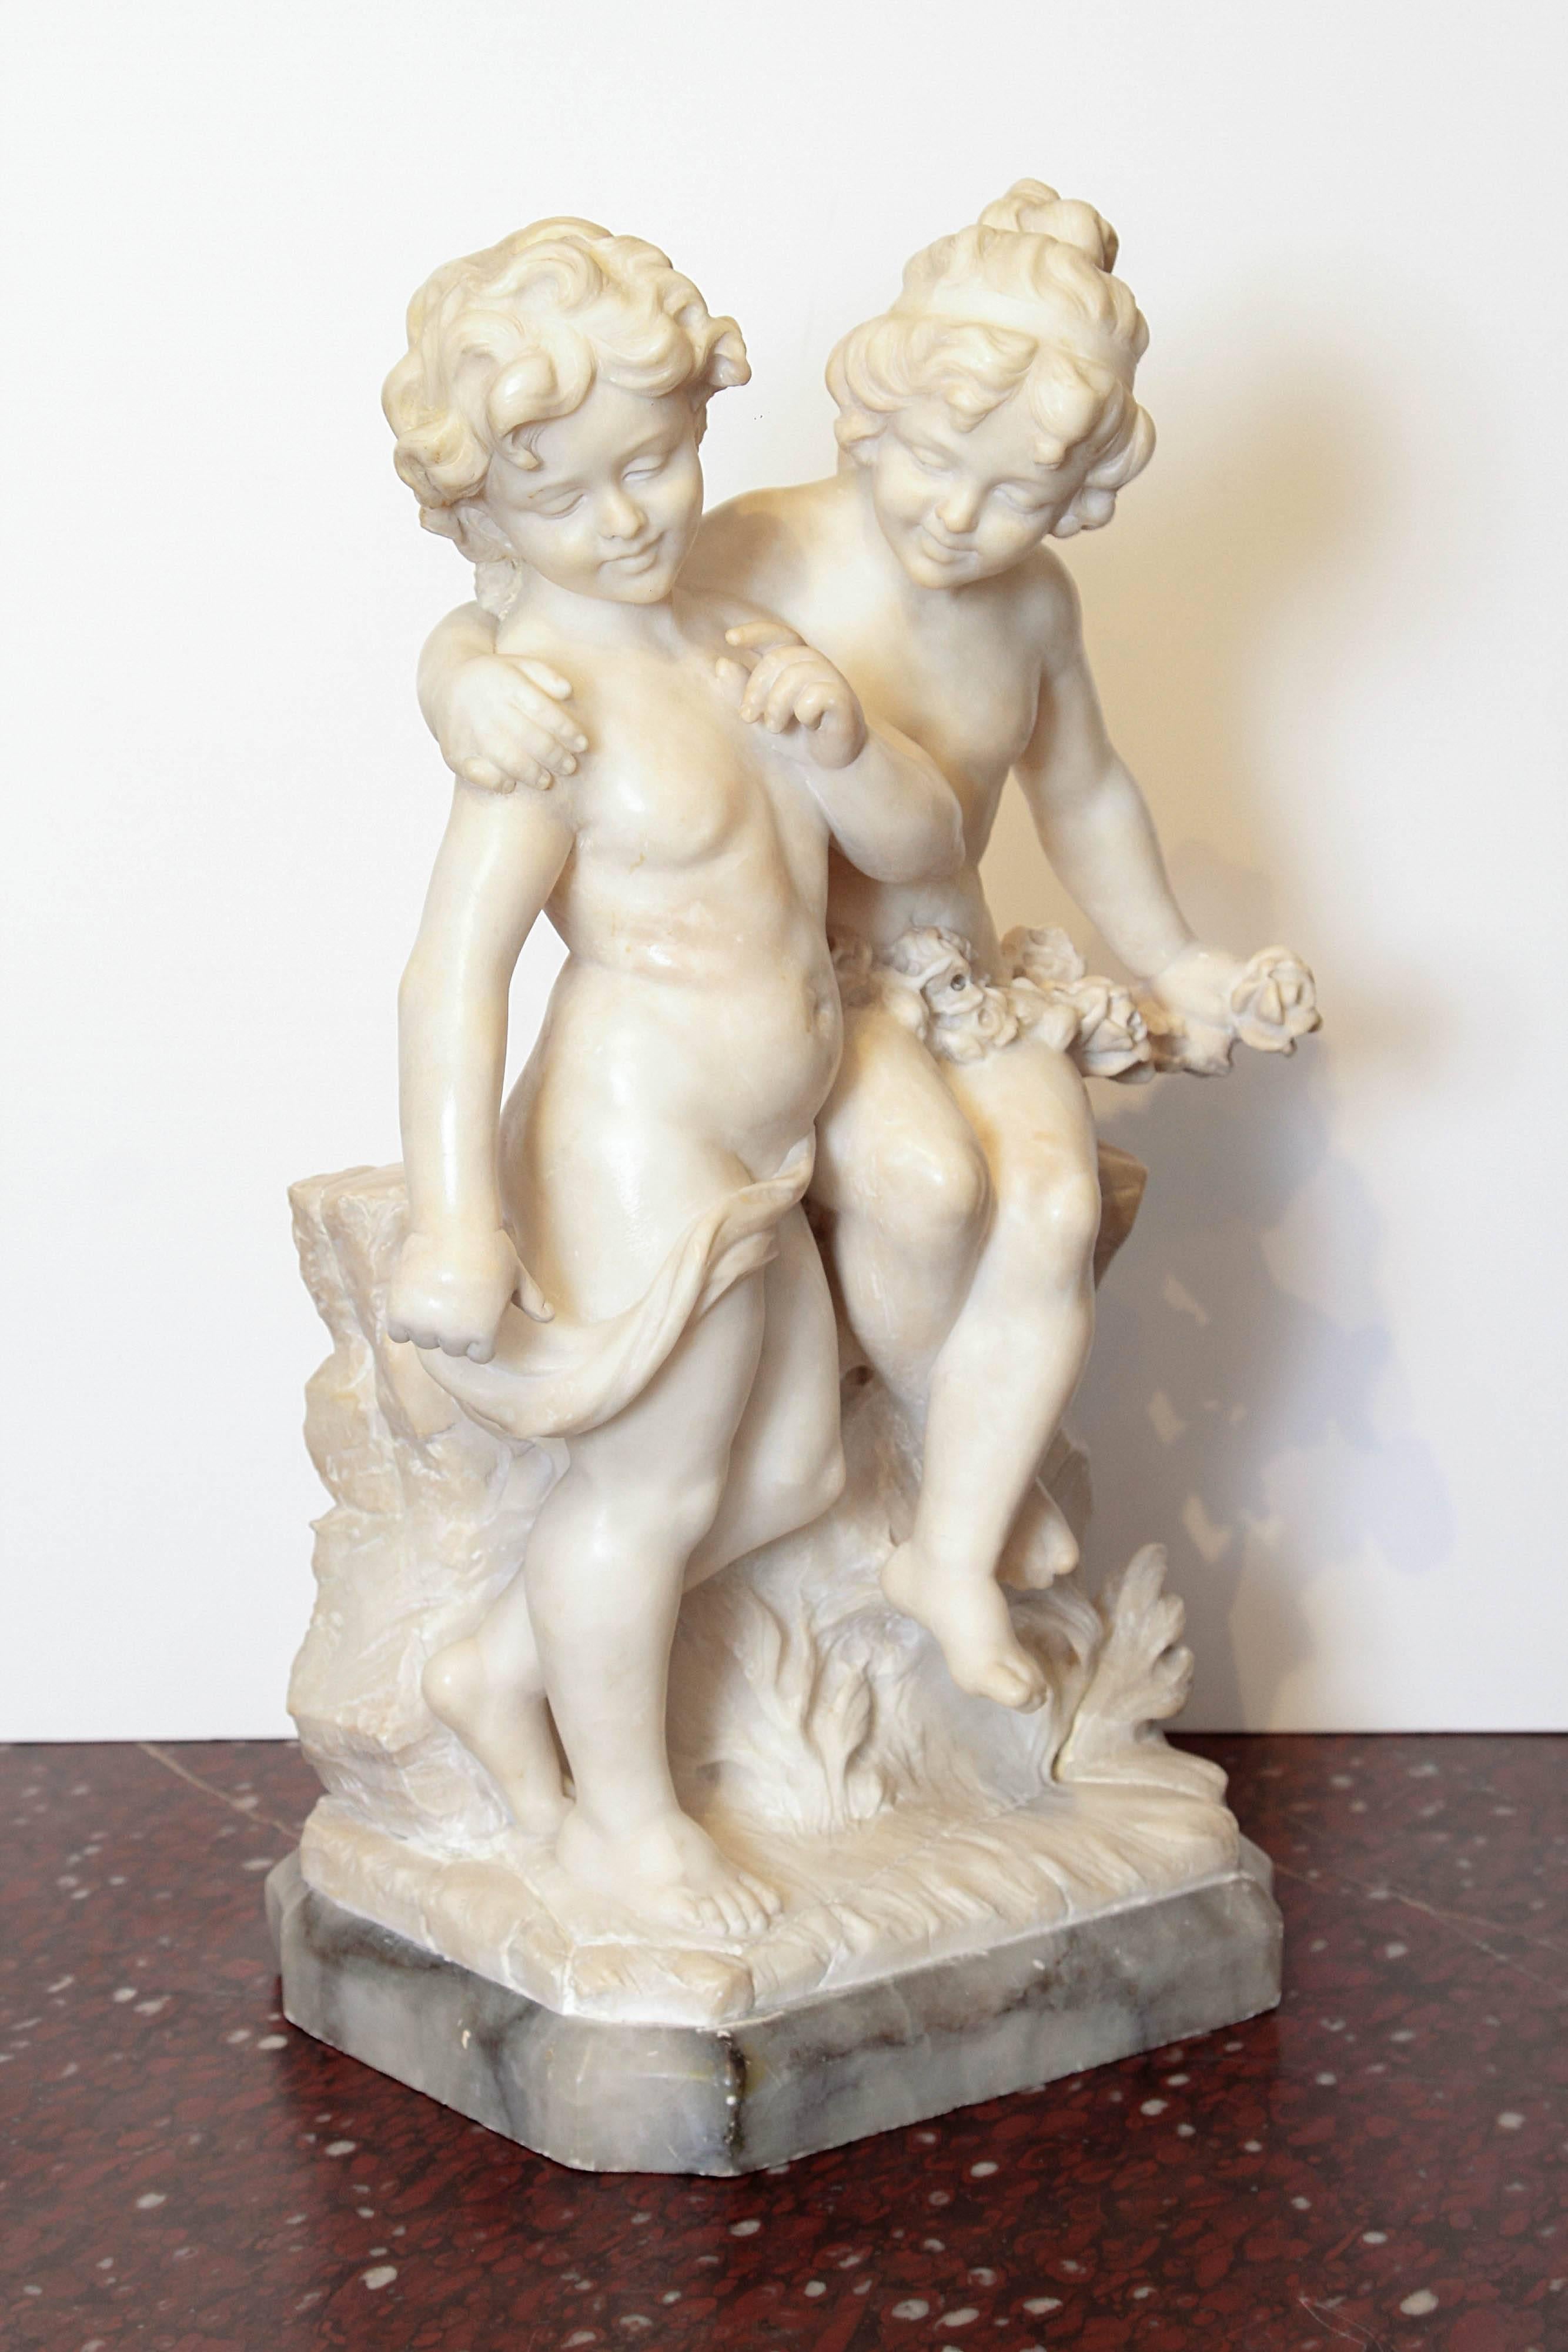 Carrara Marble 19th Century Italian Marble Sculpture of Two Children Sitting on a Wall